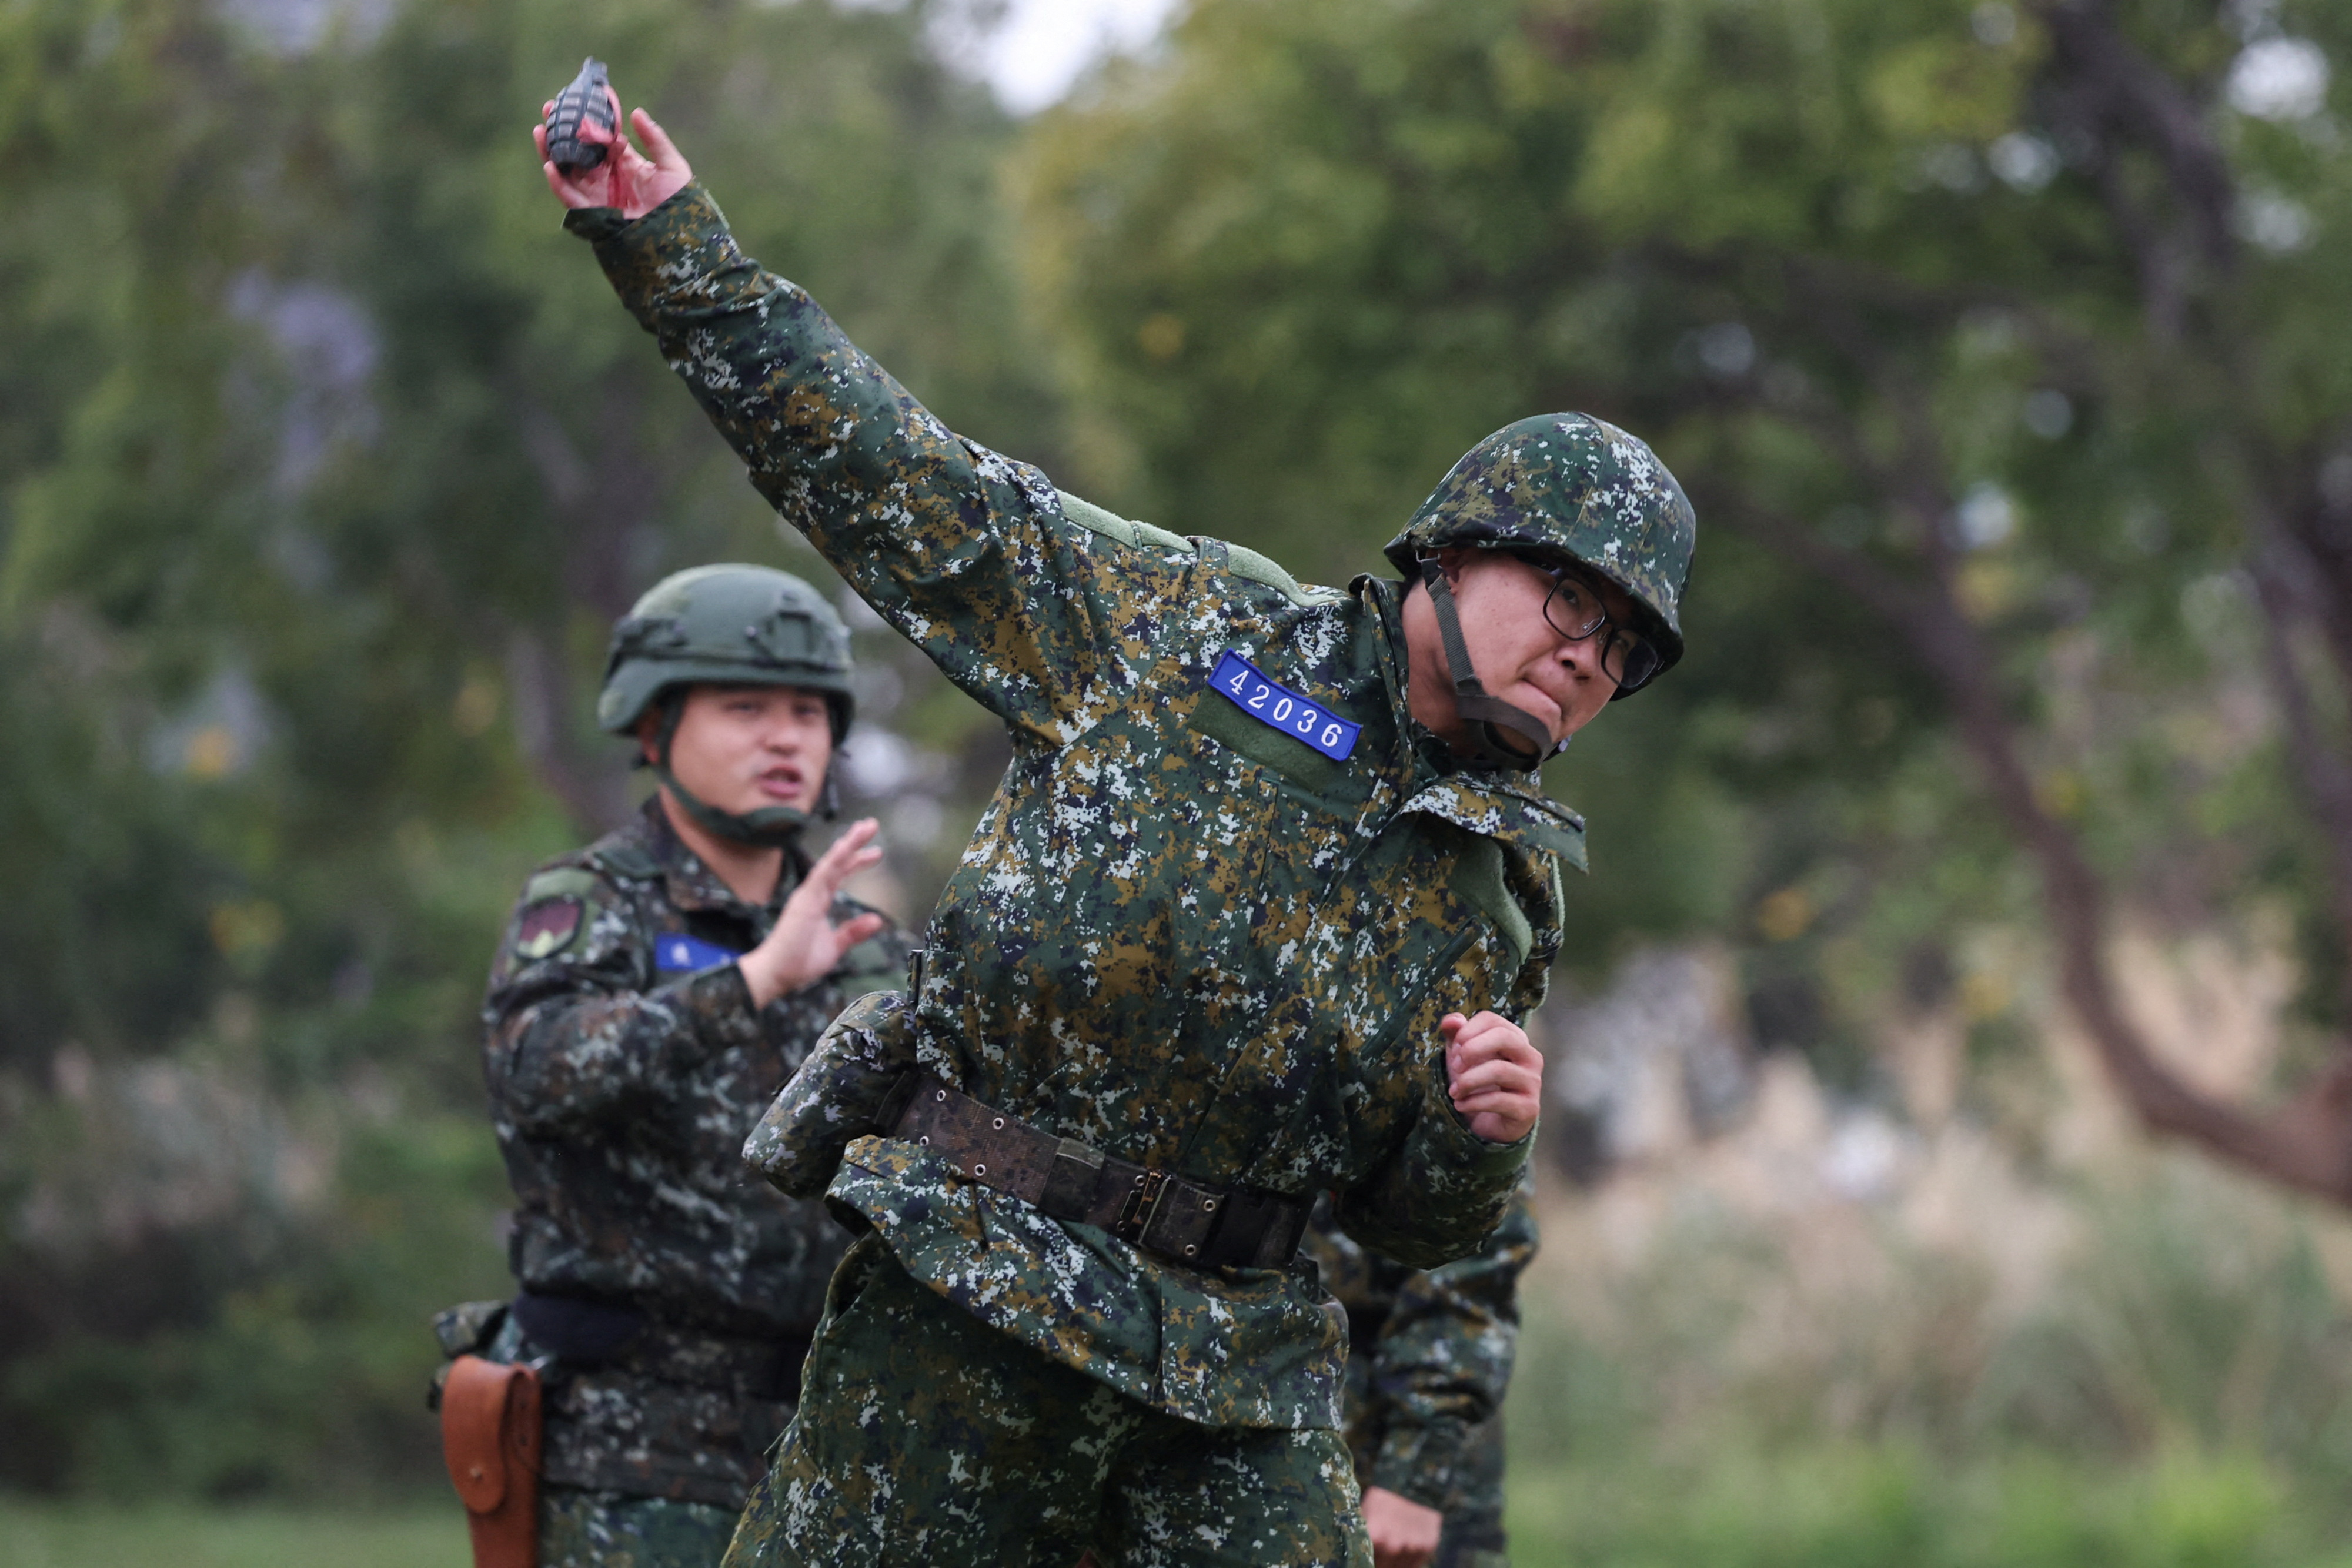 A soldier trains to throw grenade ahead of the Lunar New Year at an army base in Hsinchu